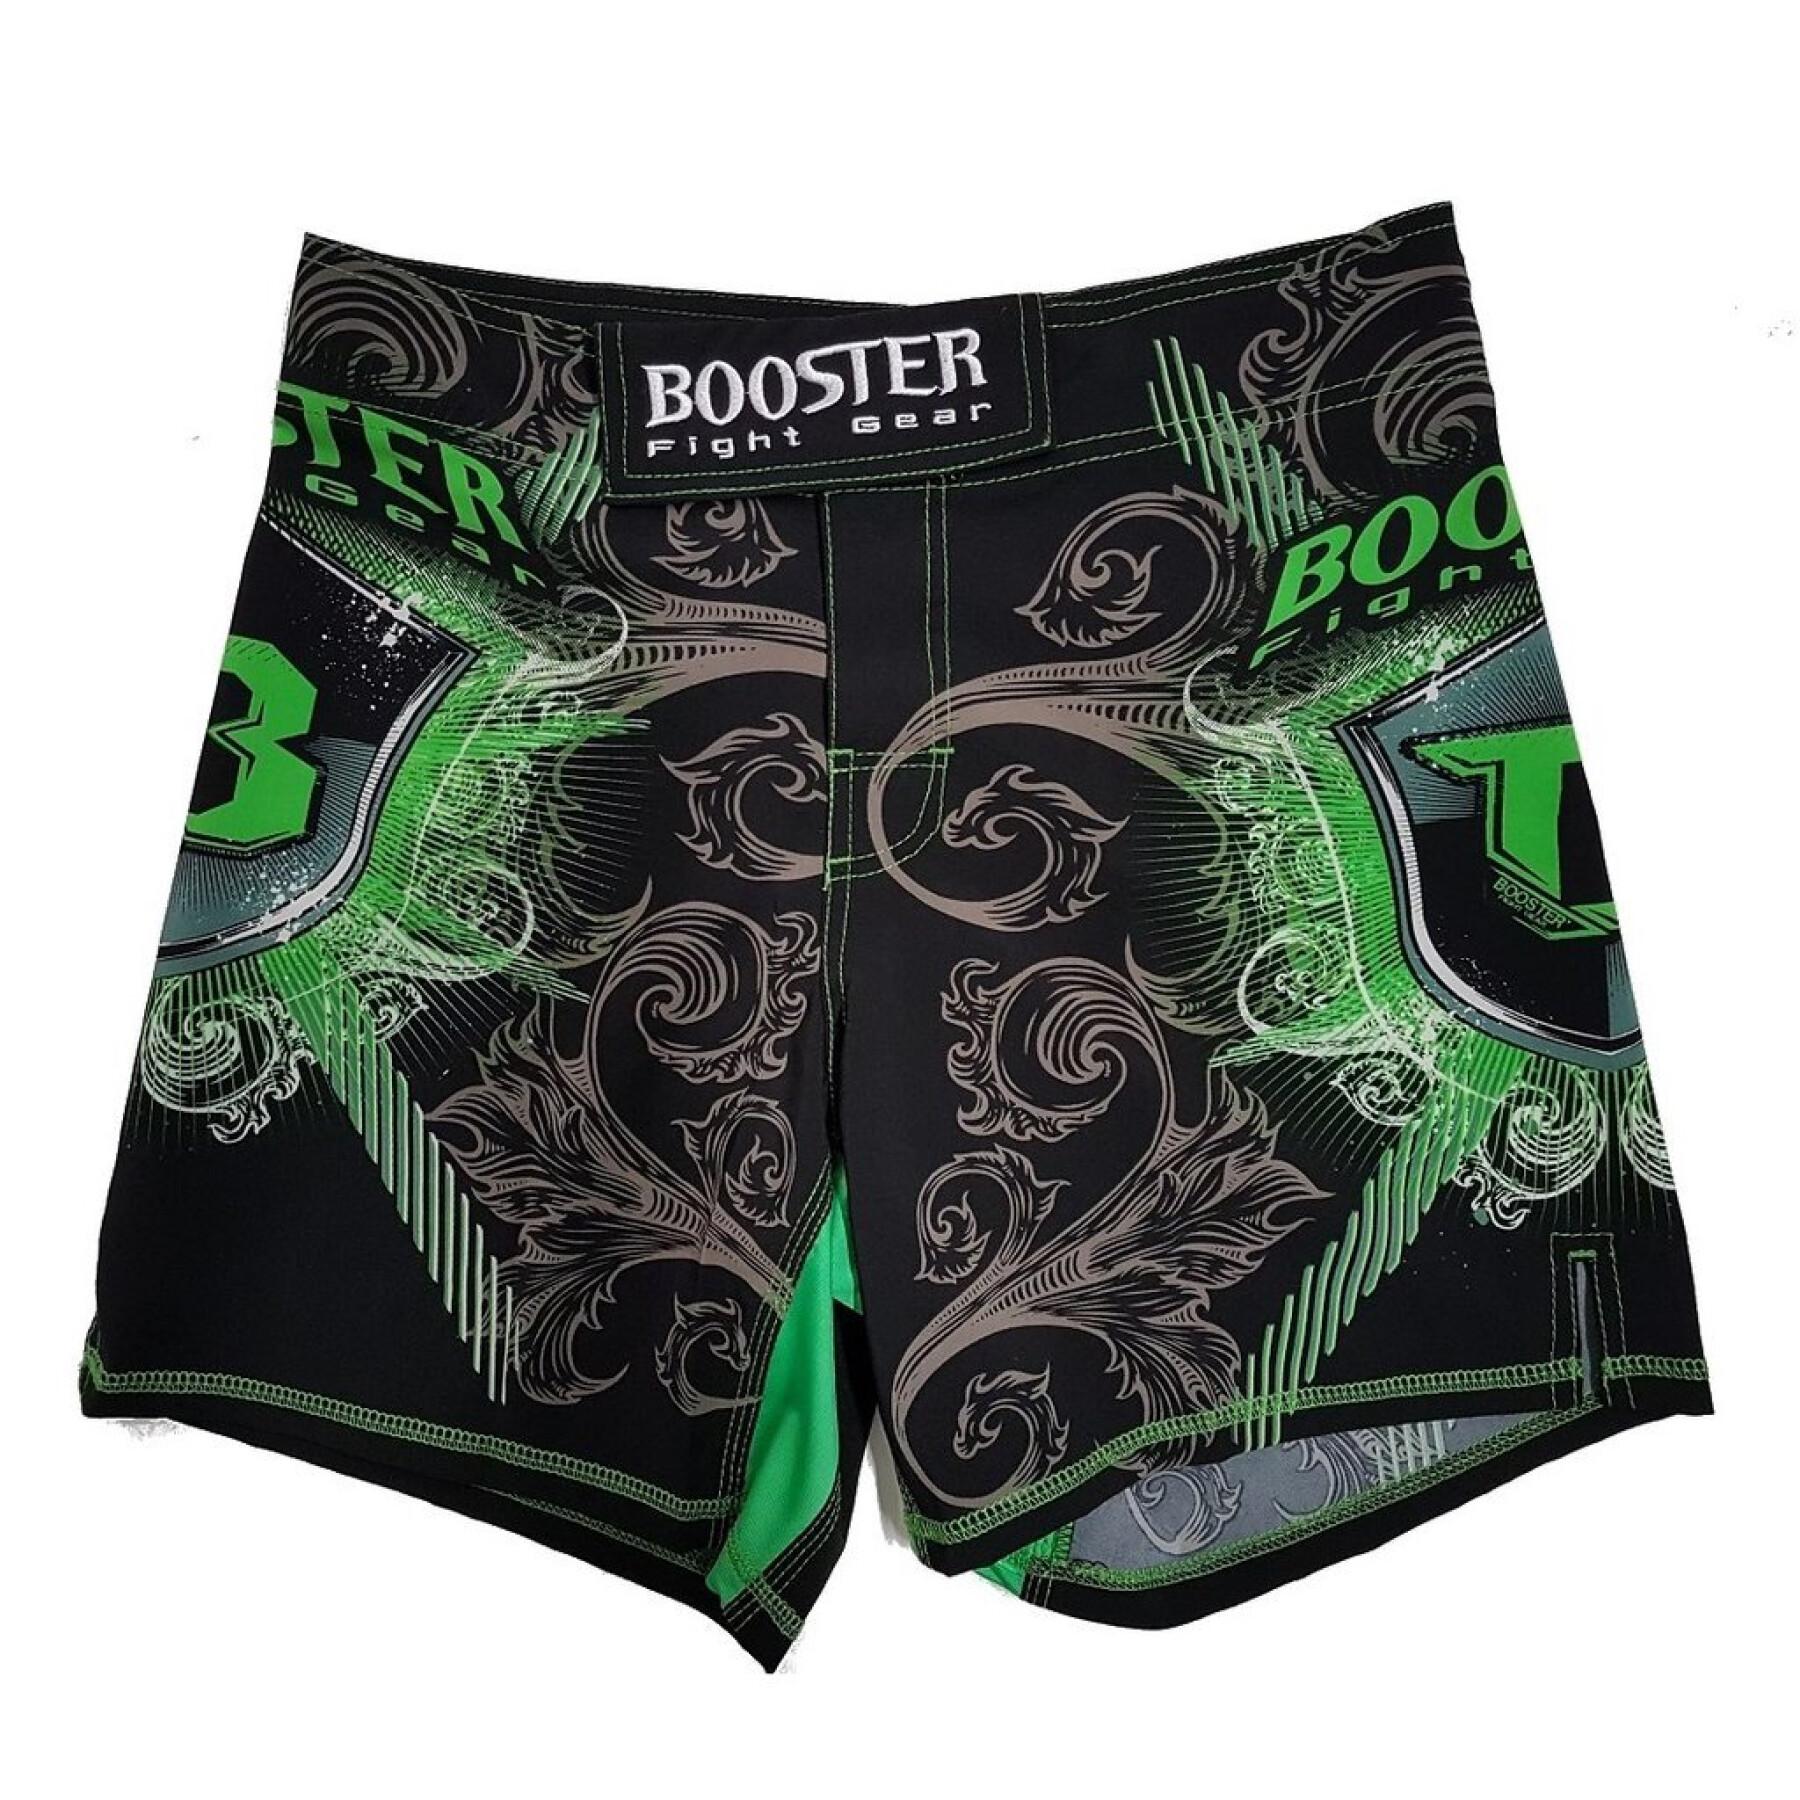 MMA-shorts Booster Fight Gear Pro 15